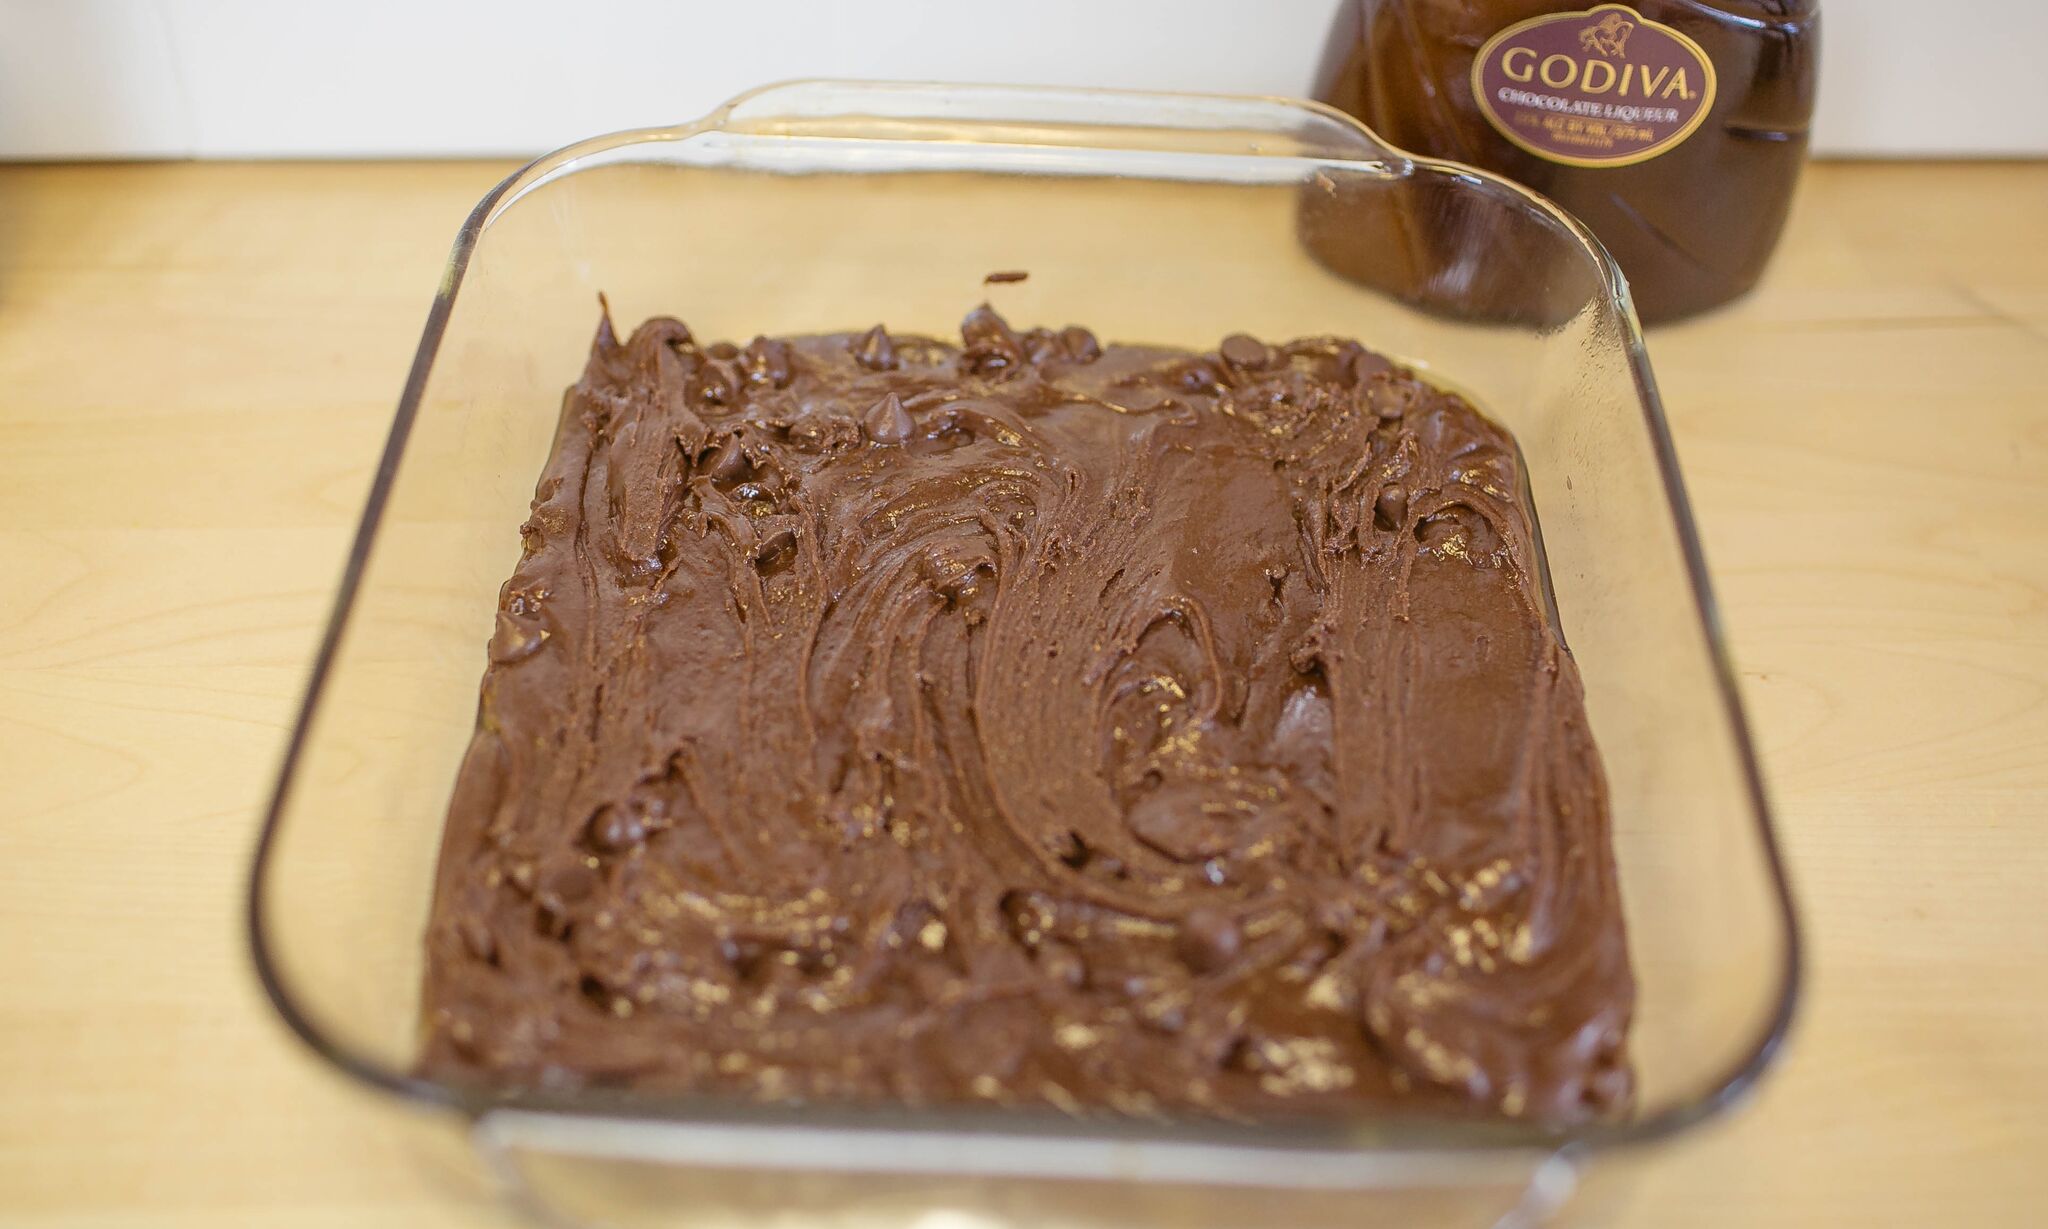 Pour brownie mix into a prepared pan.